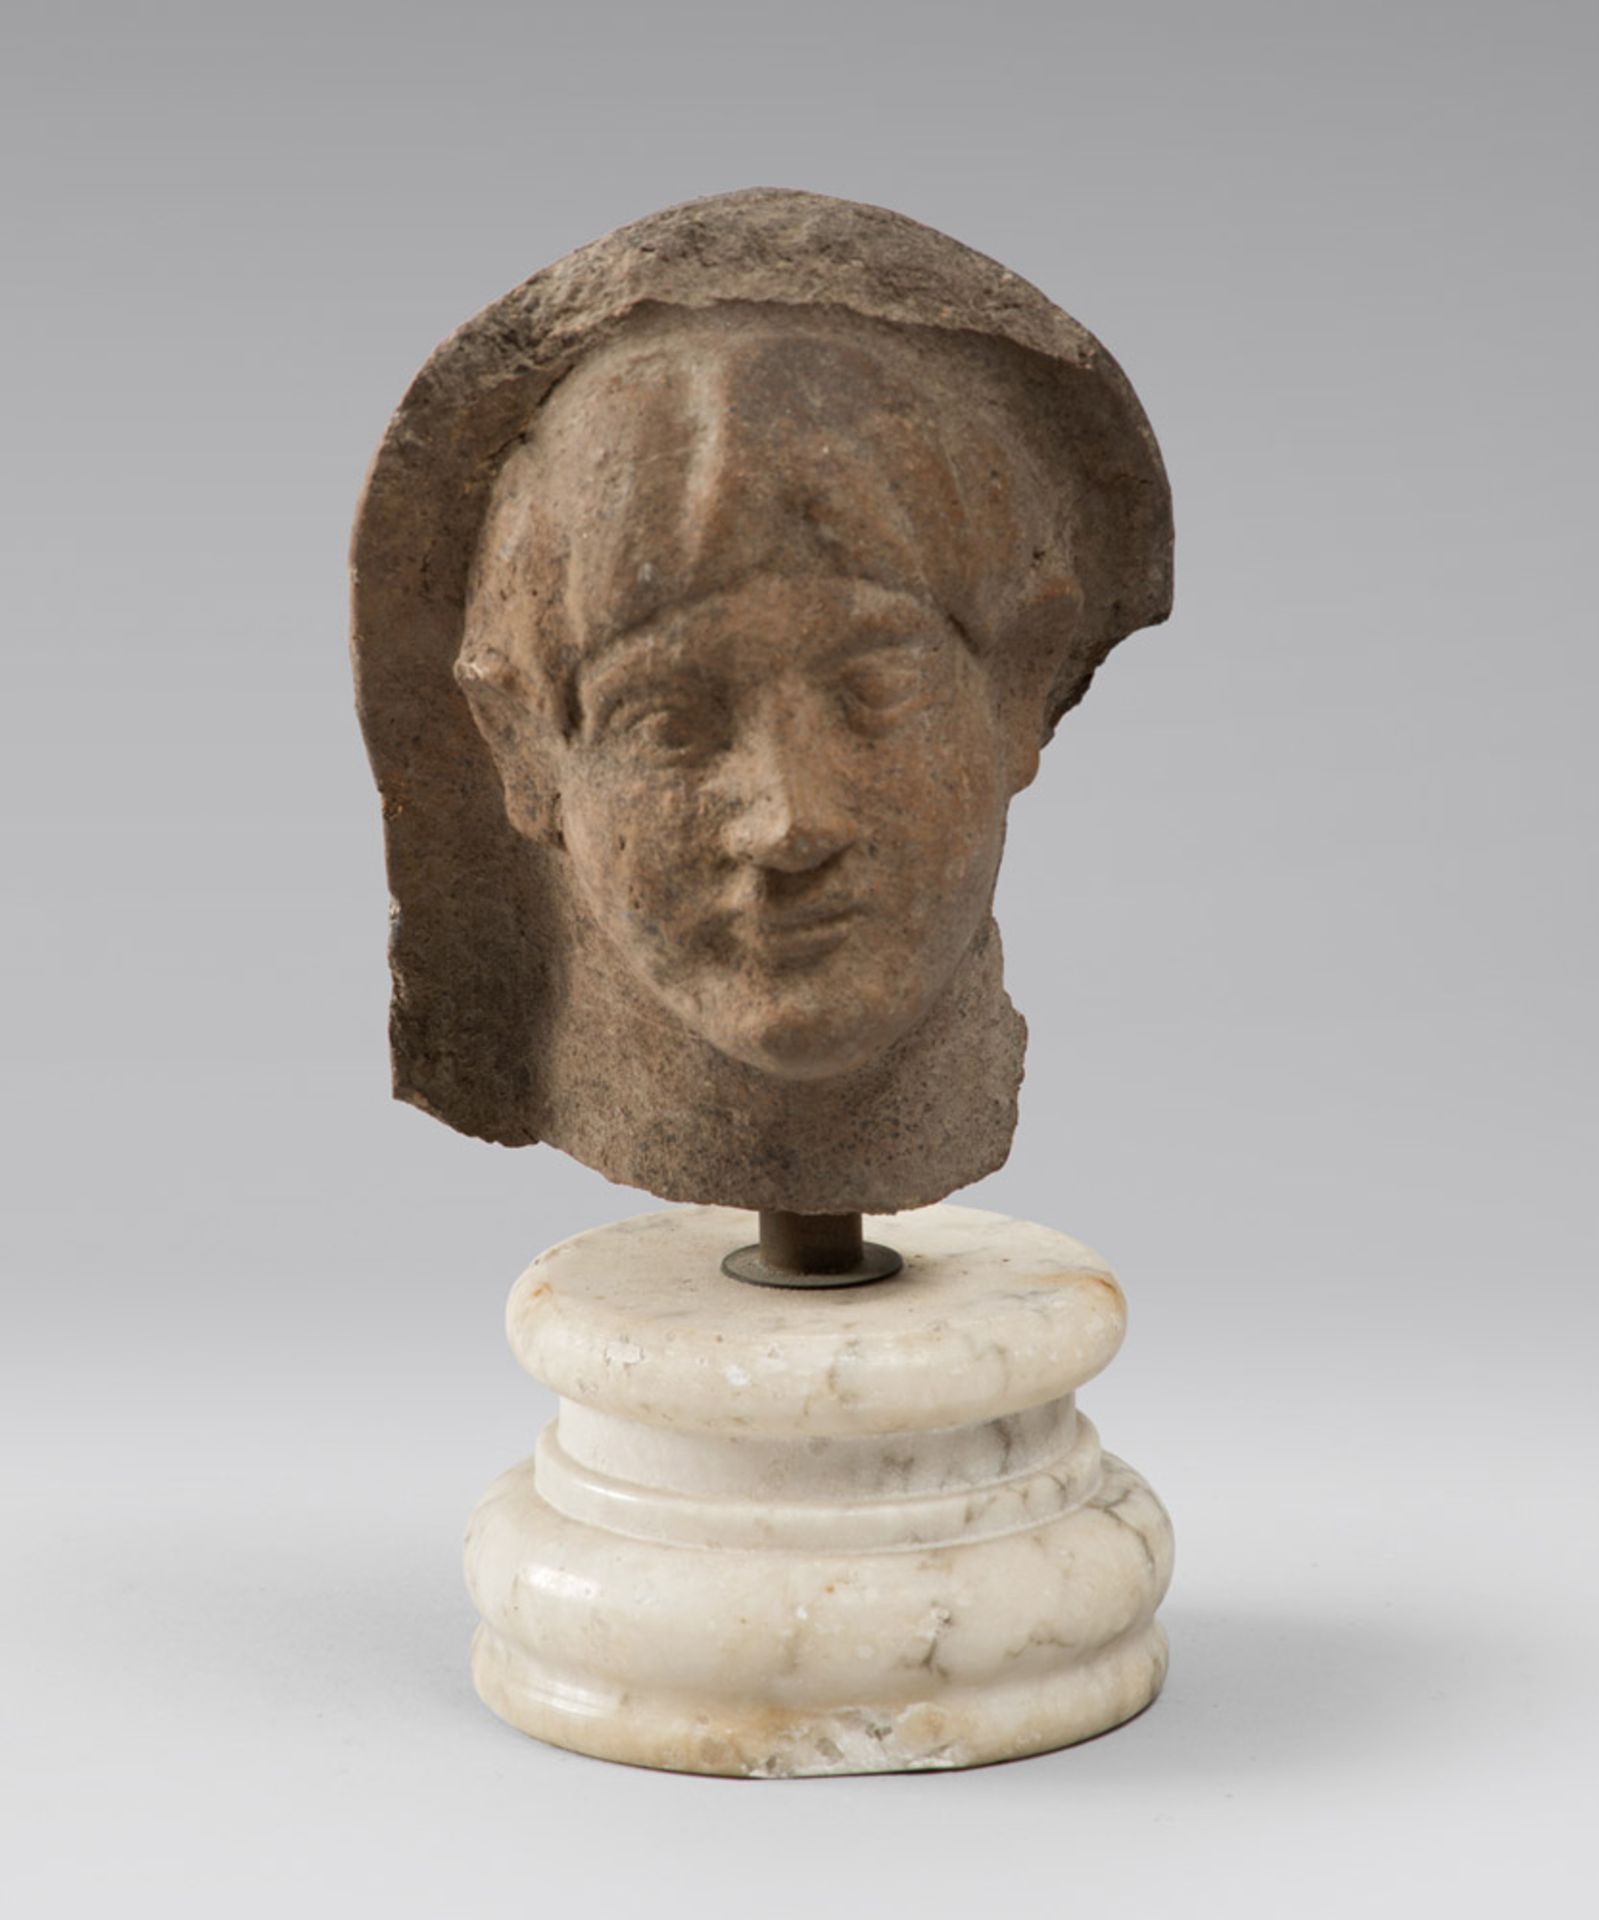 A VOTIVE MALE HEAD, 4TH, 1ST CENTURY B.C. Brown earthenware. Oval face, well-defined eyes, very